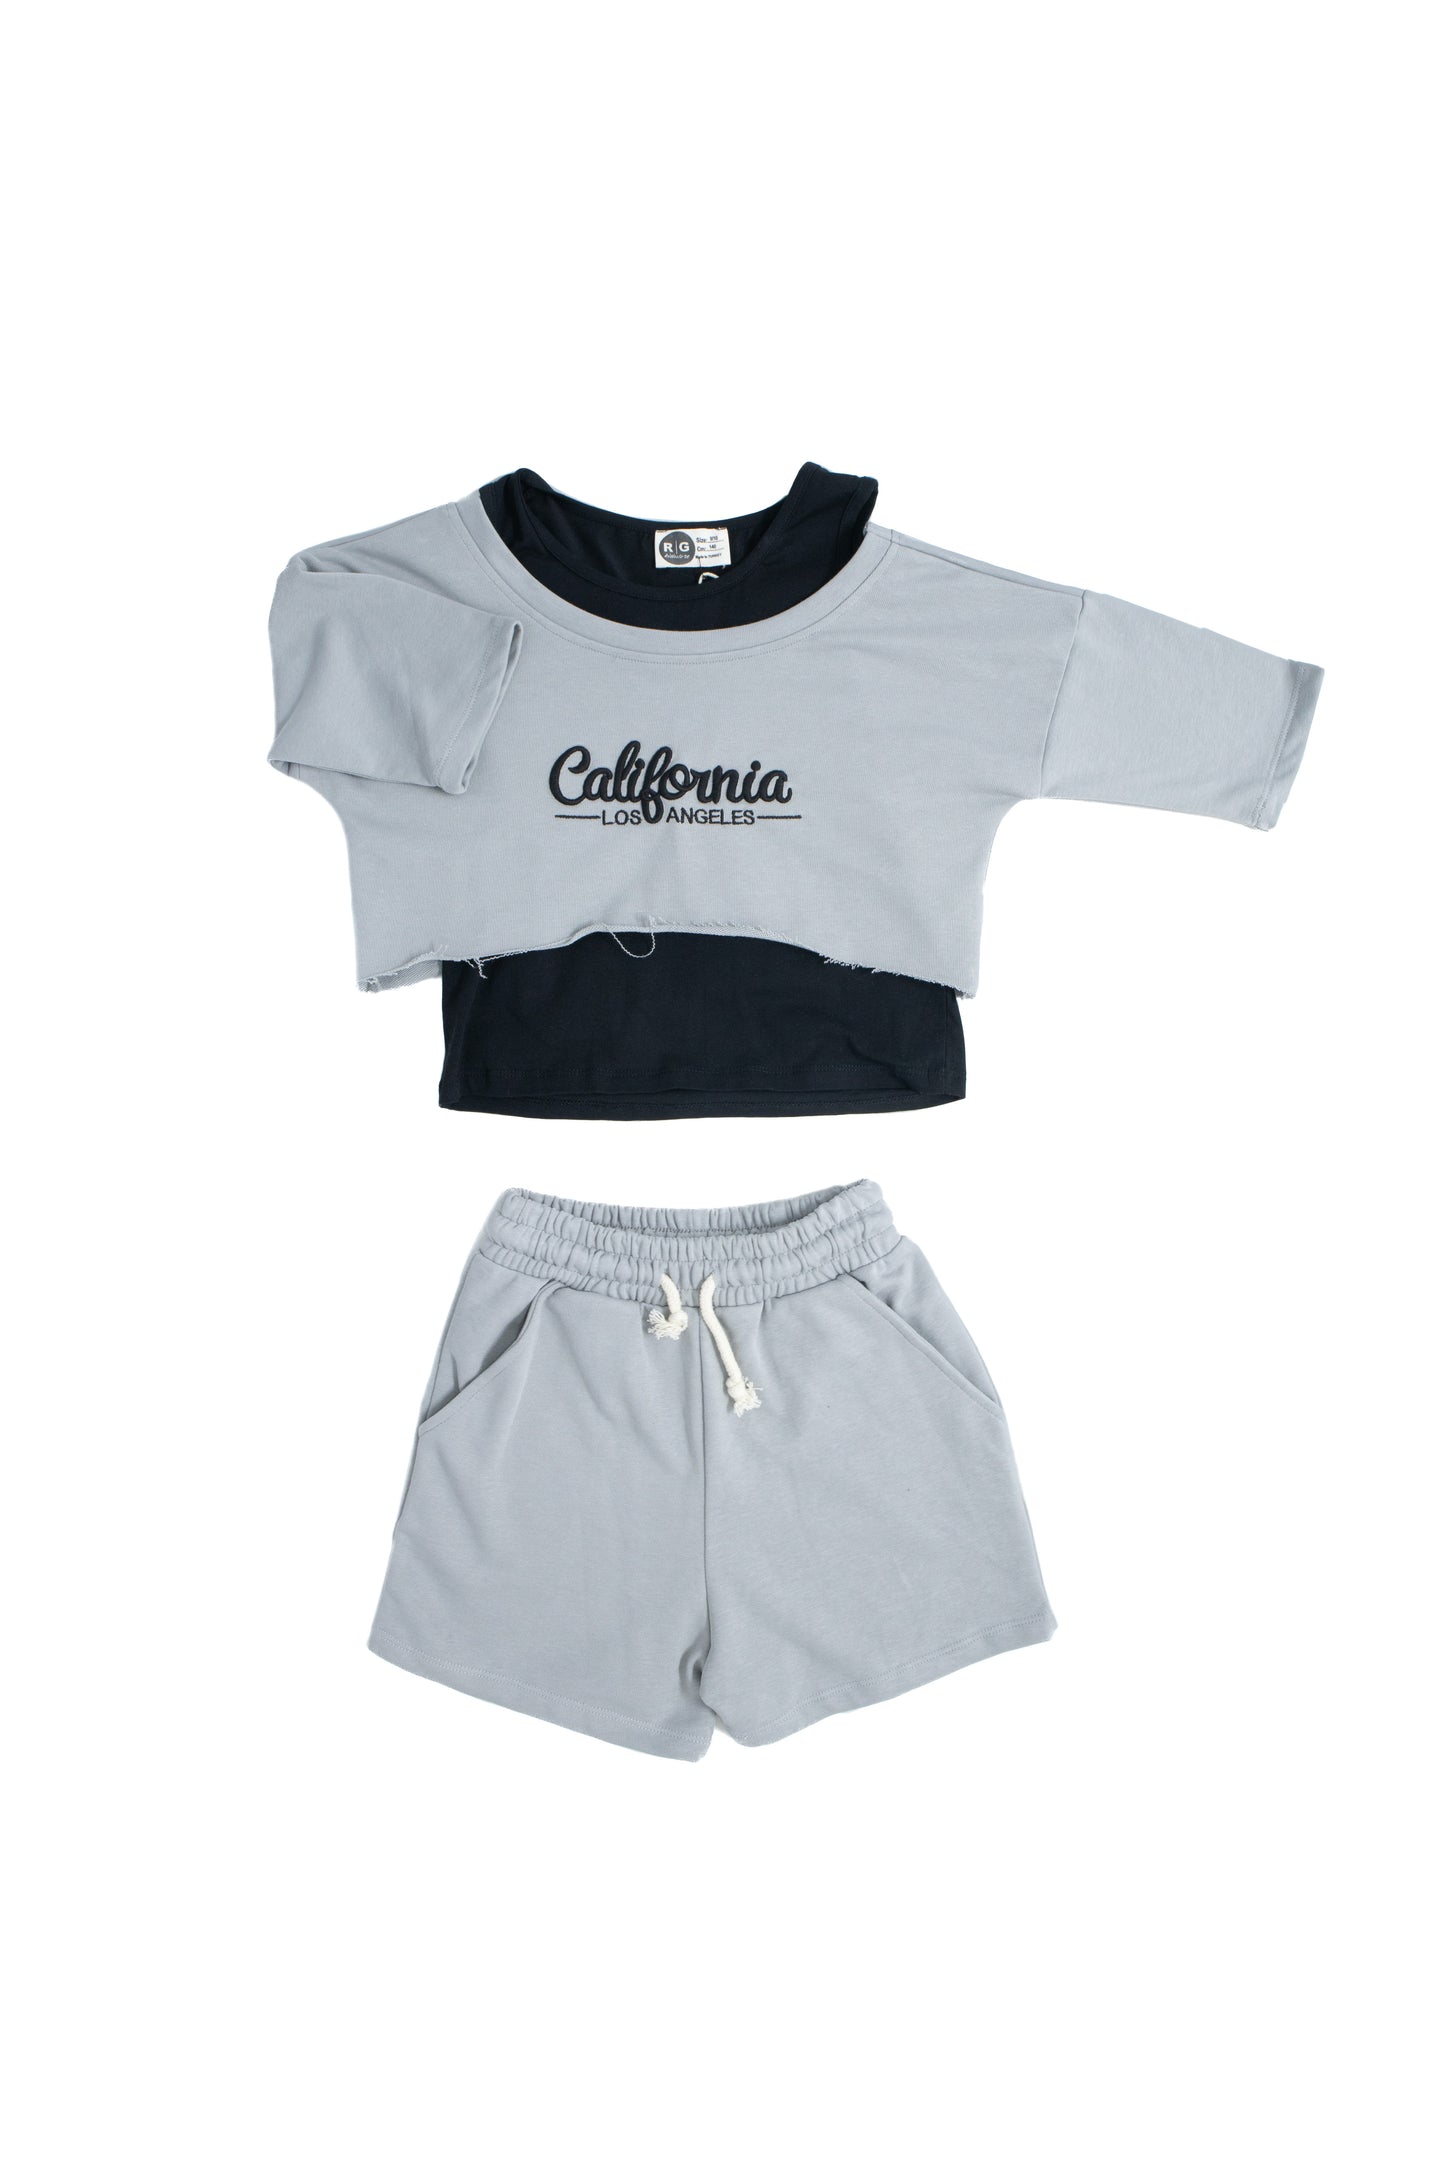 Young Girl's 100% Cotton 3-Piece Set with Embroidery Detailed Shorts